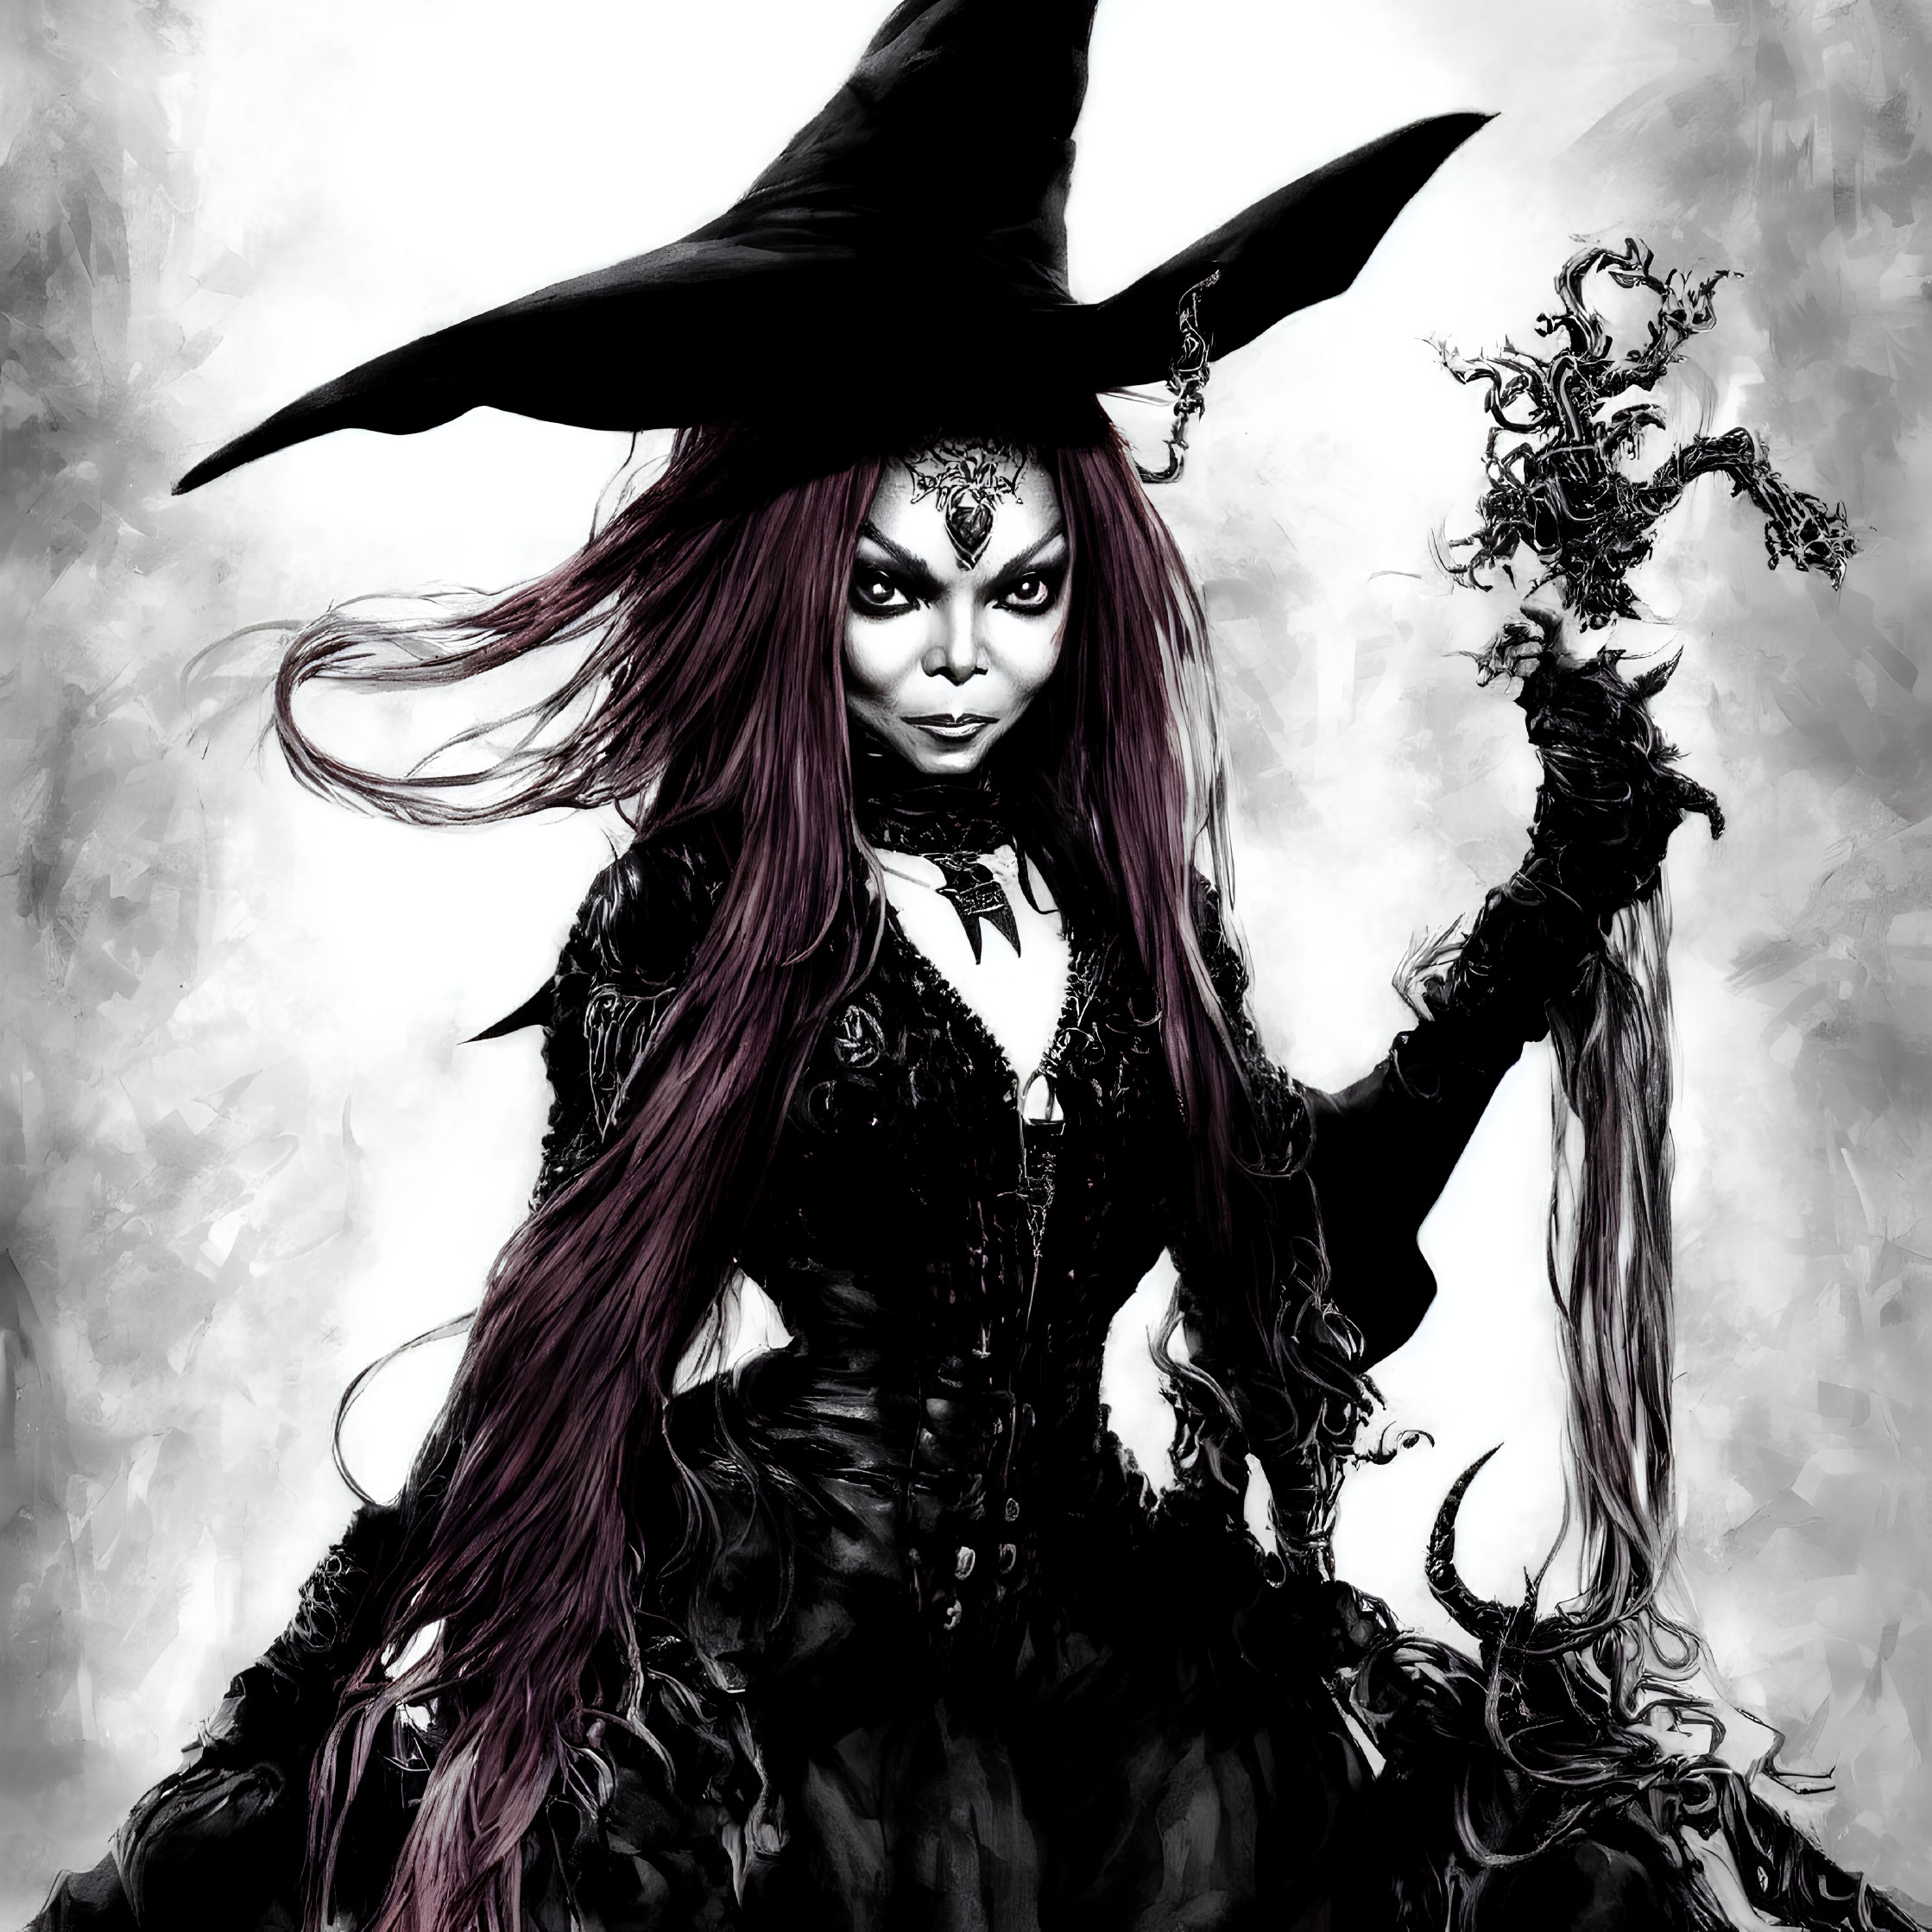 Stylized witch with pointed hat and staff on monochrome background